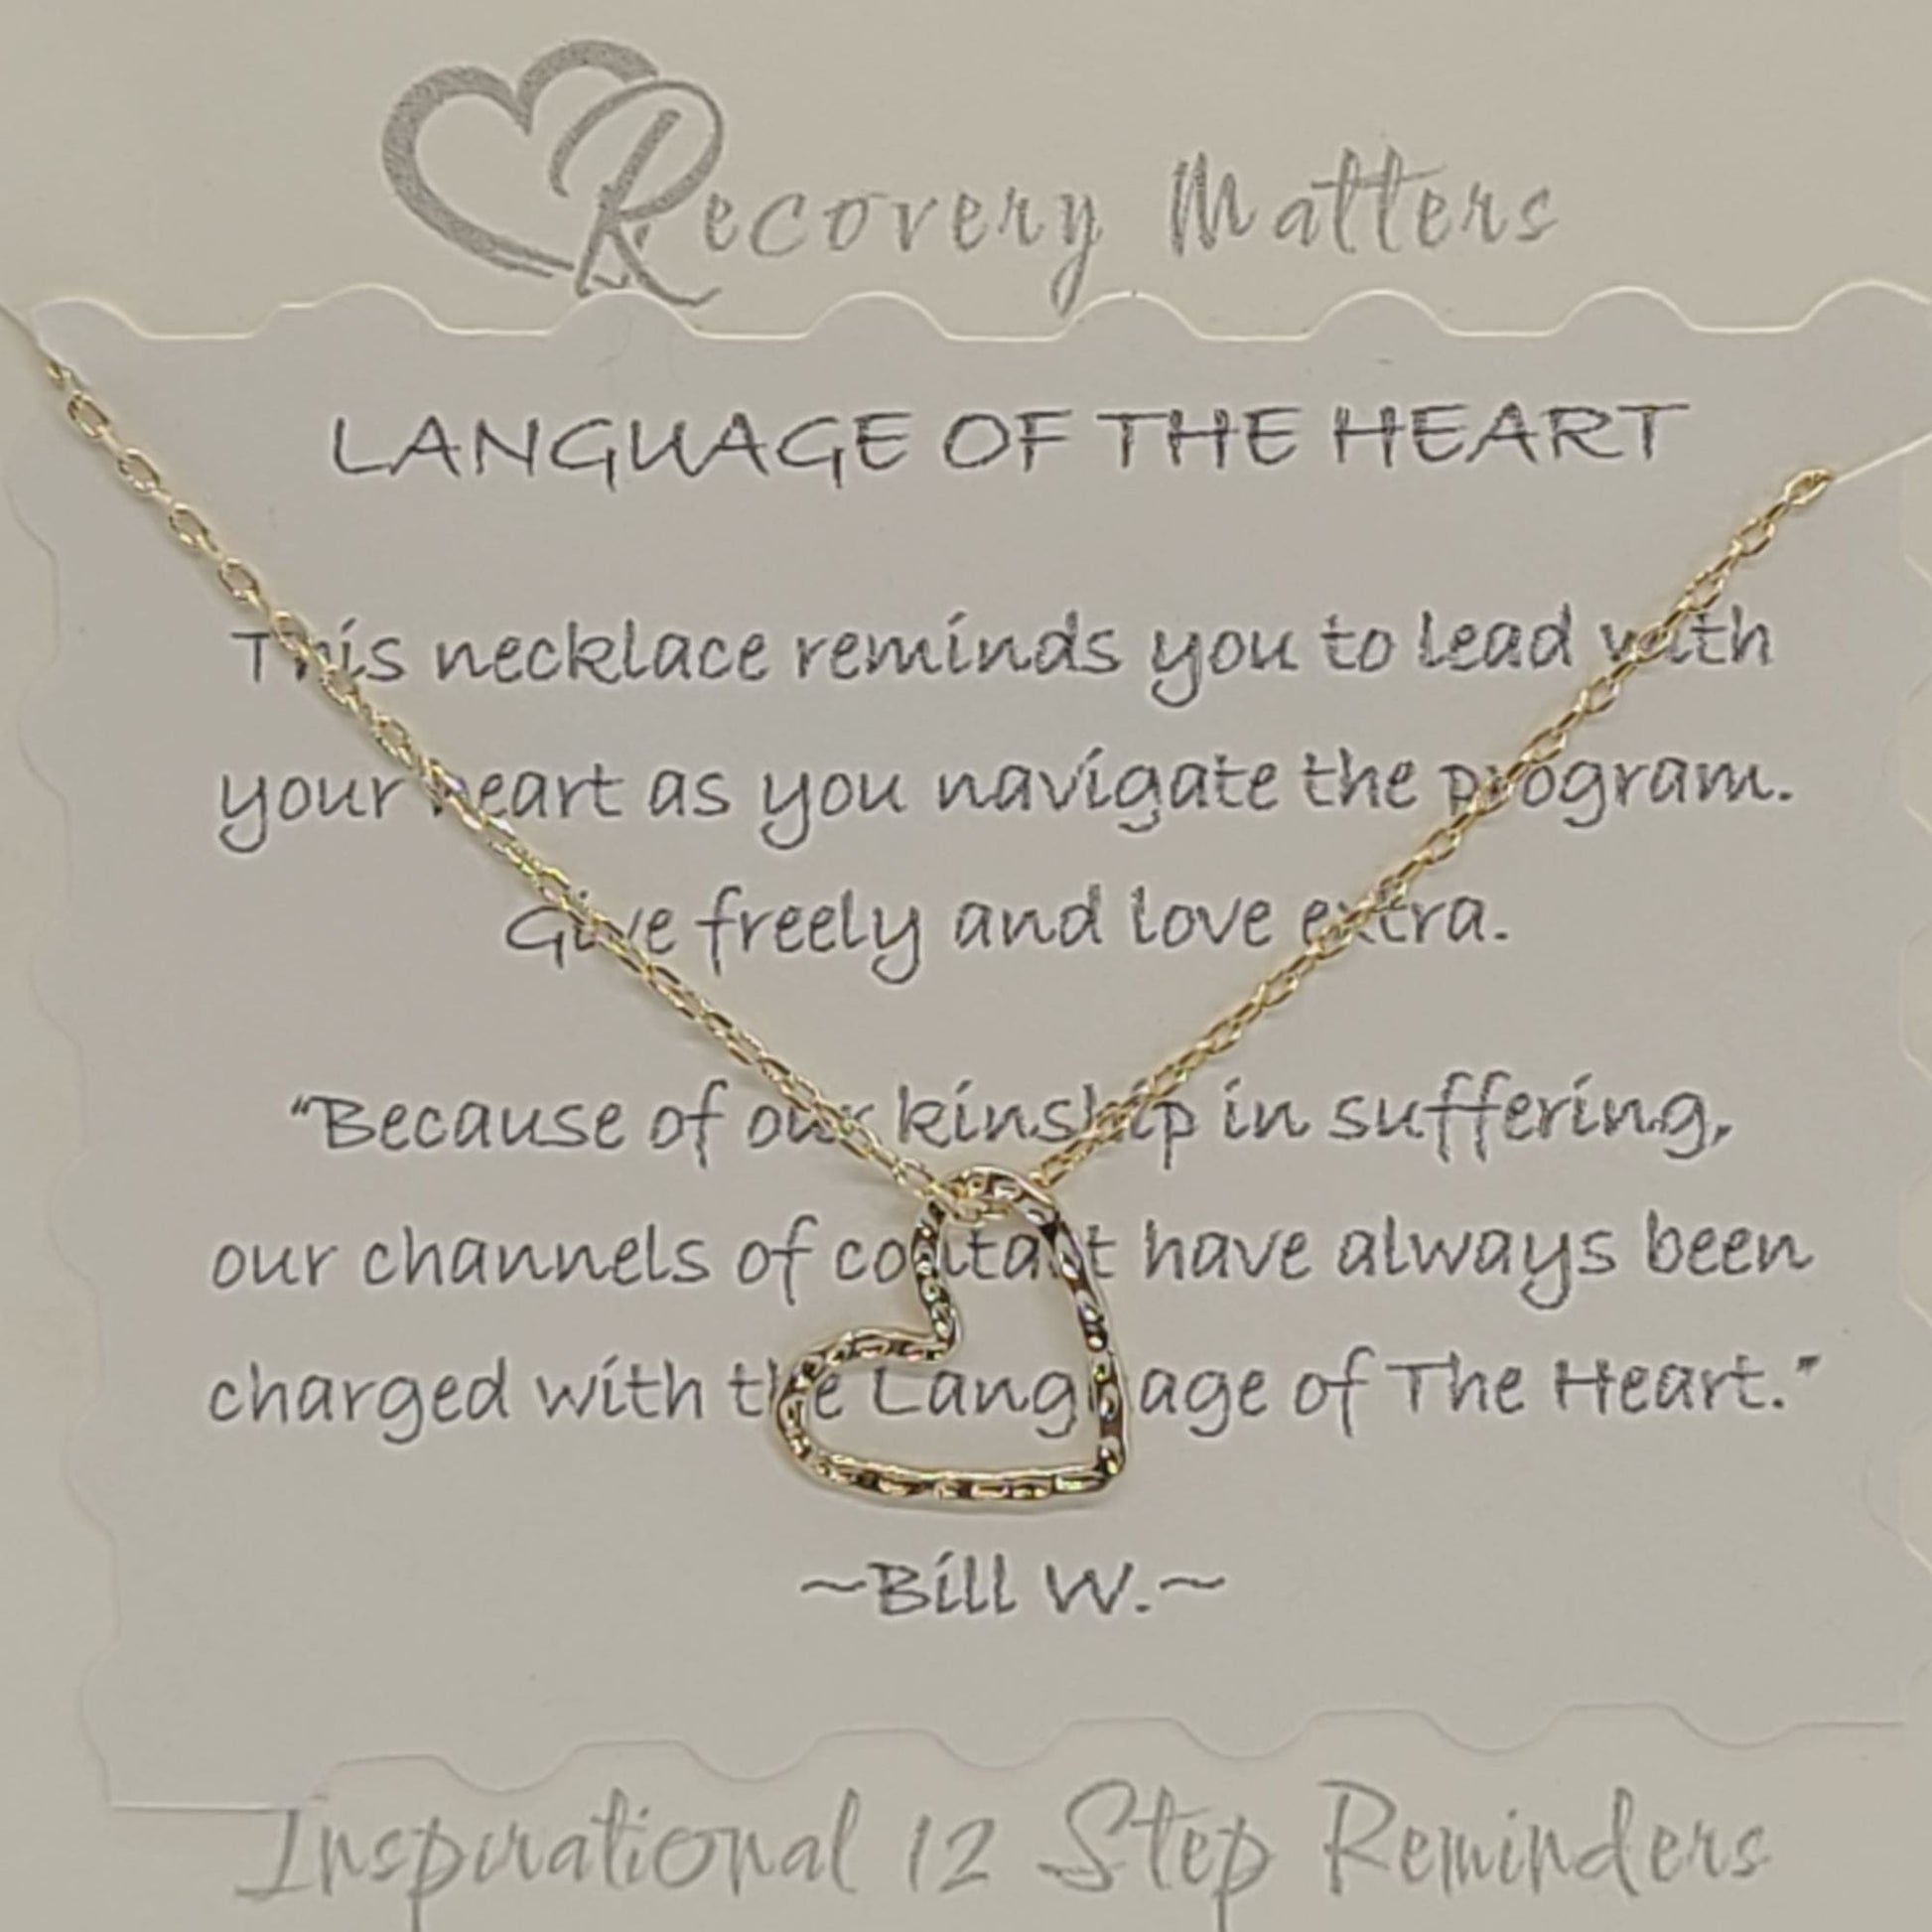 Language of the Heart Necklace by Recovery Matters